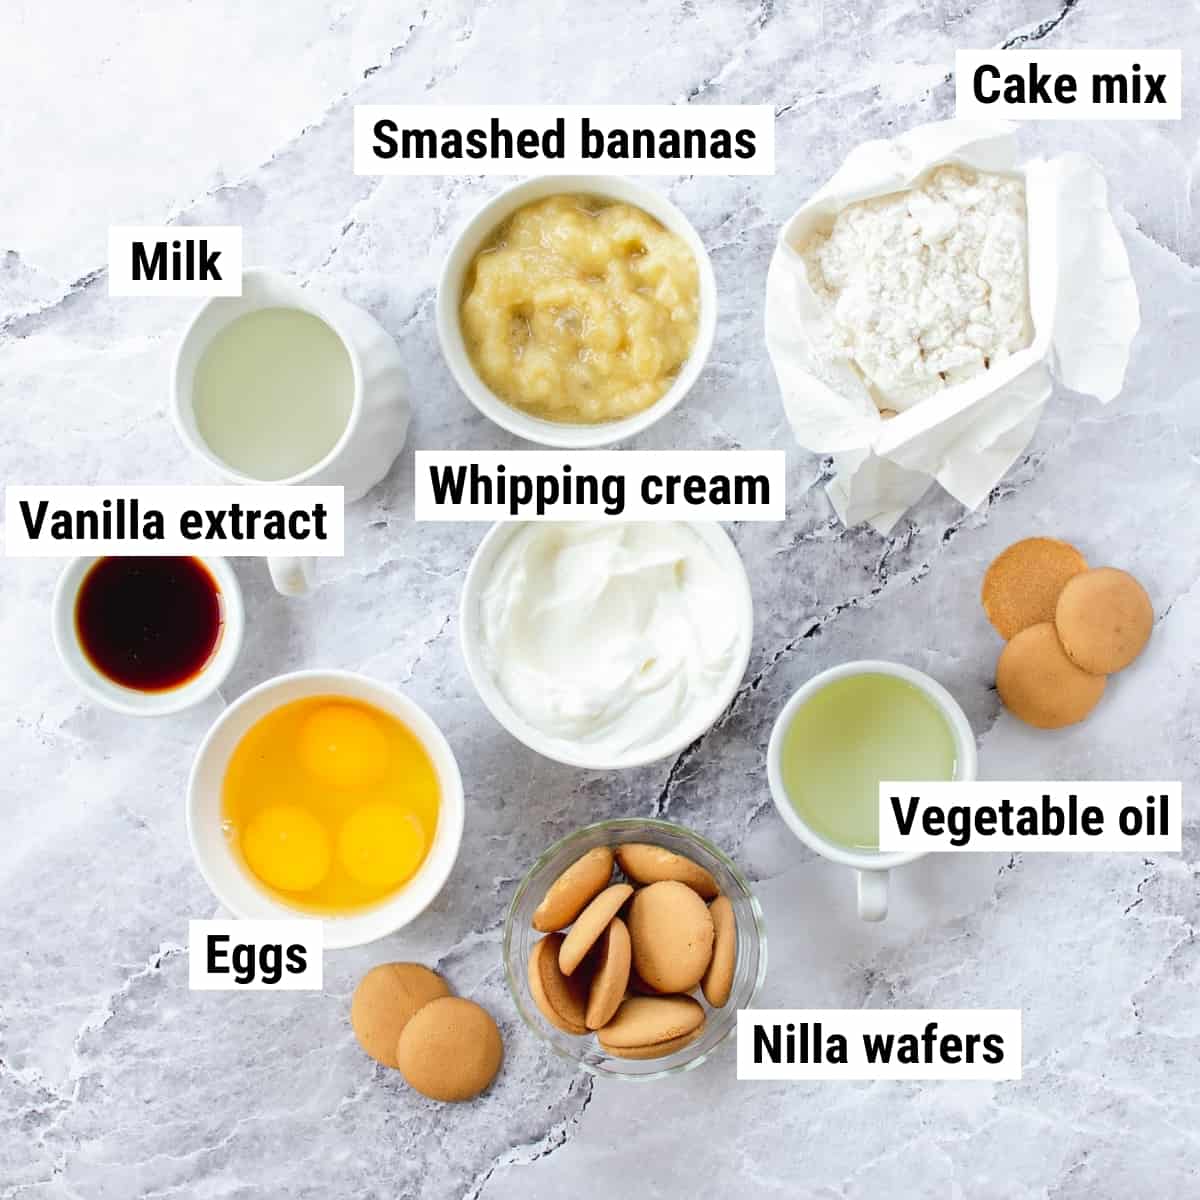 The ingredients used to make banana cream cupcakes laid out on a table.